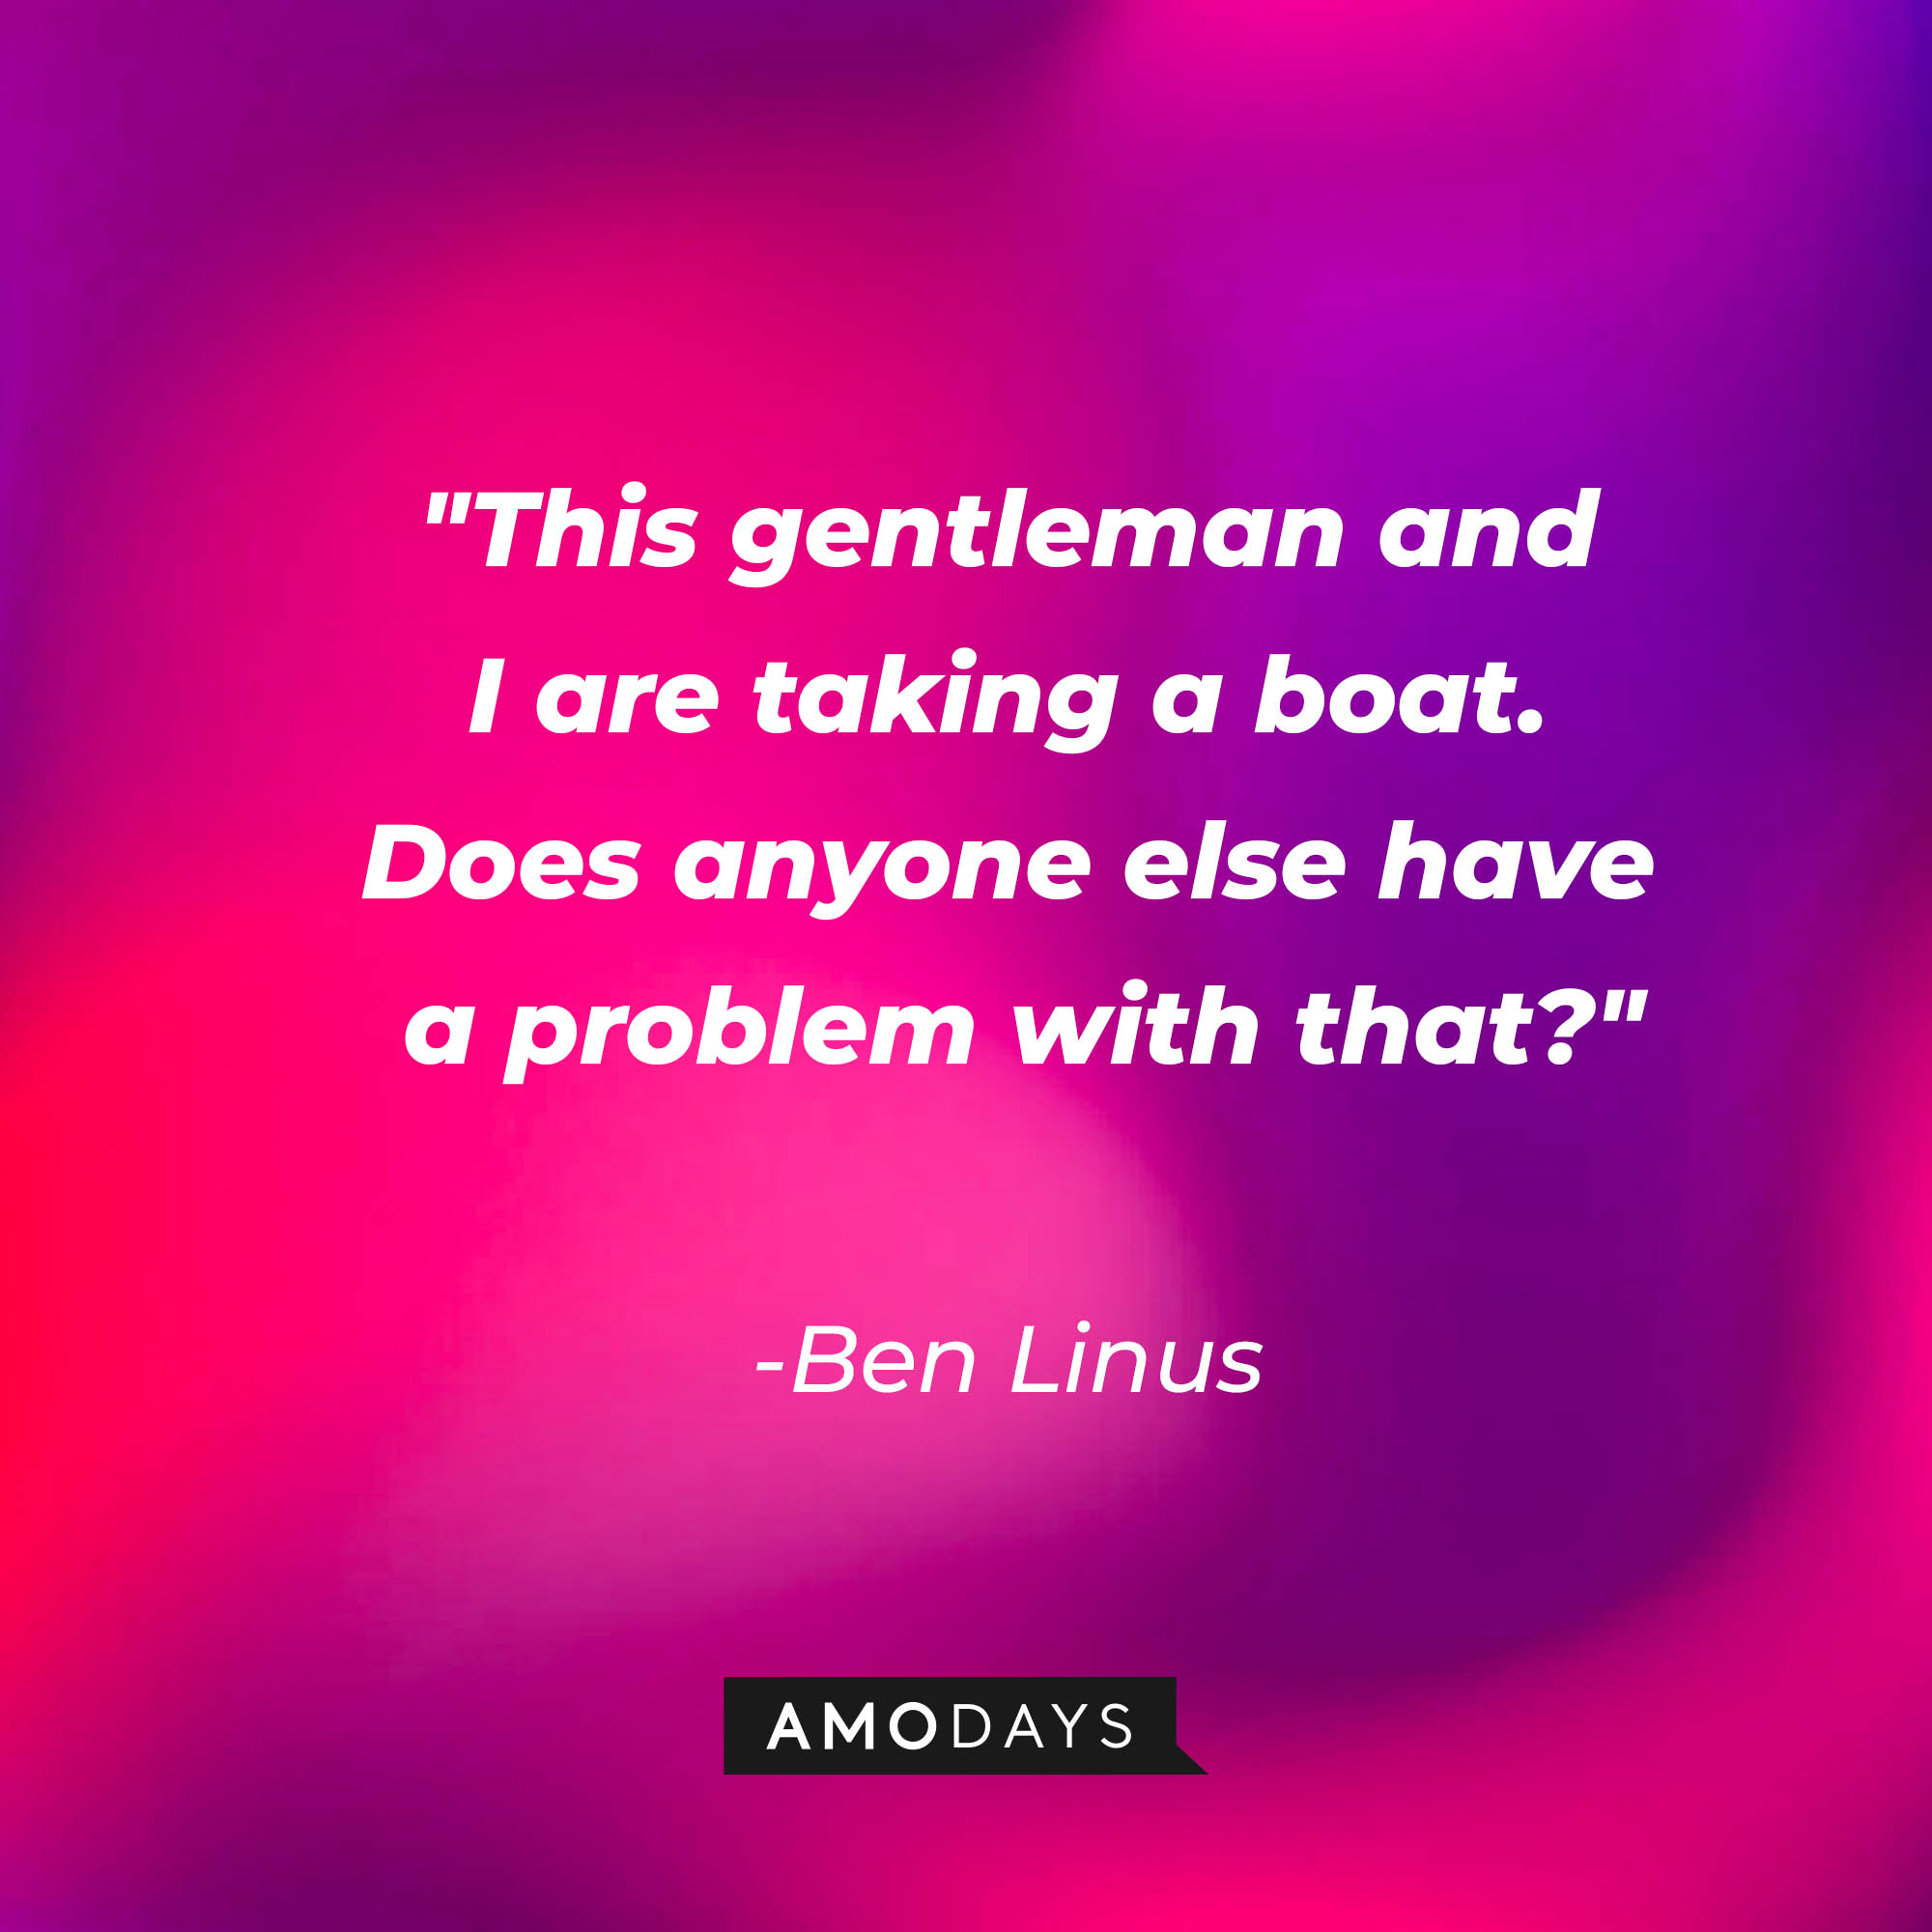 Ben Linus's quote: "This gentleman and I are taking a boat. Does anyone else have a problem with that?" | Source: AmoDays